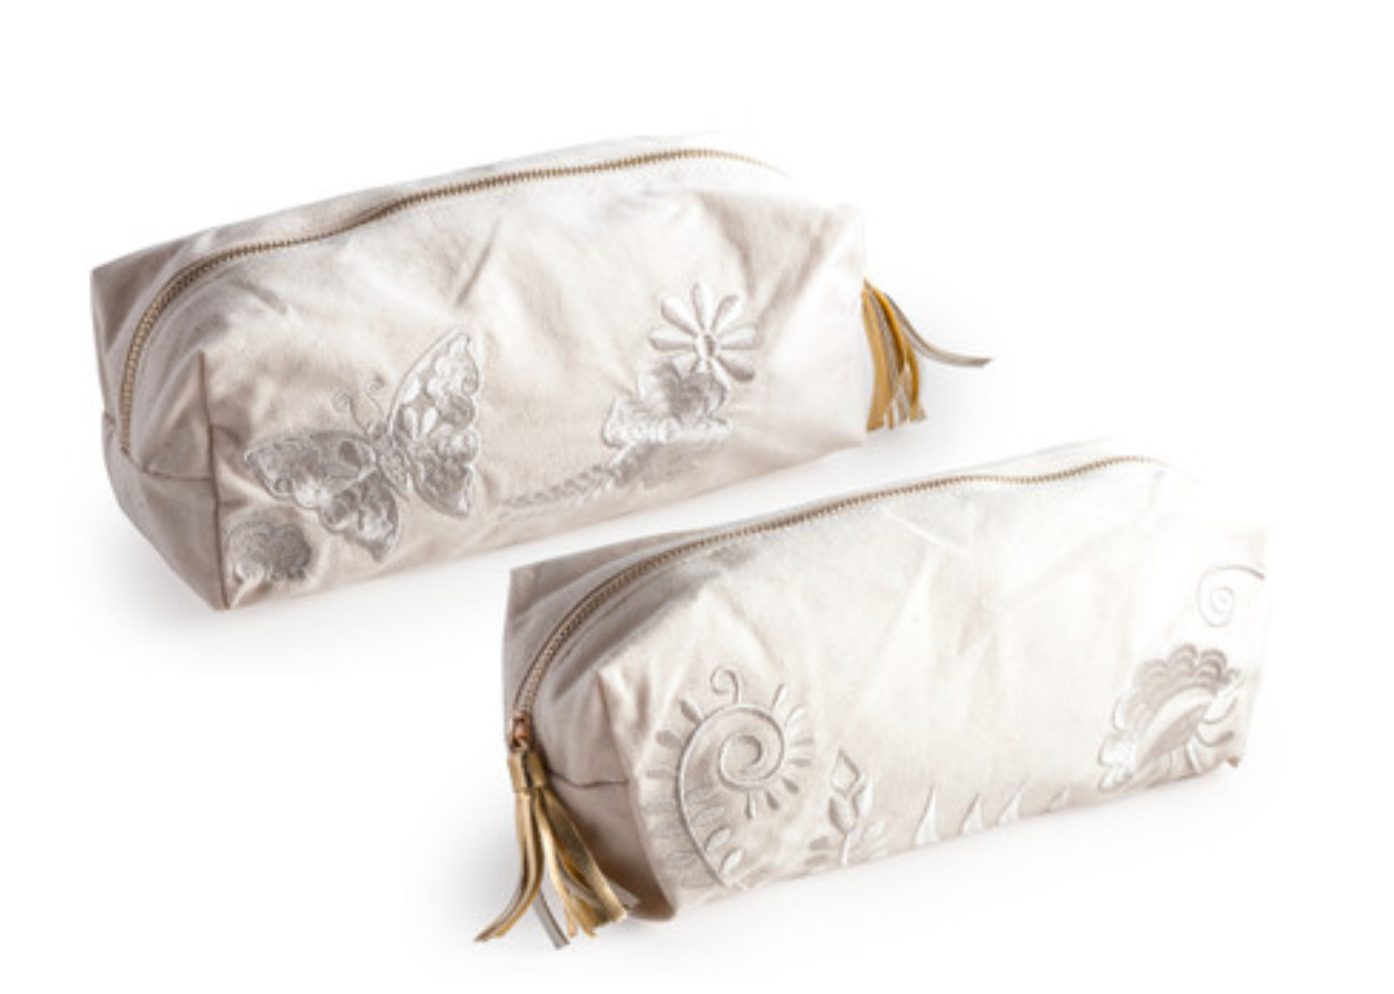 Cream embroidered cosmetic bag